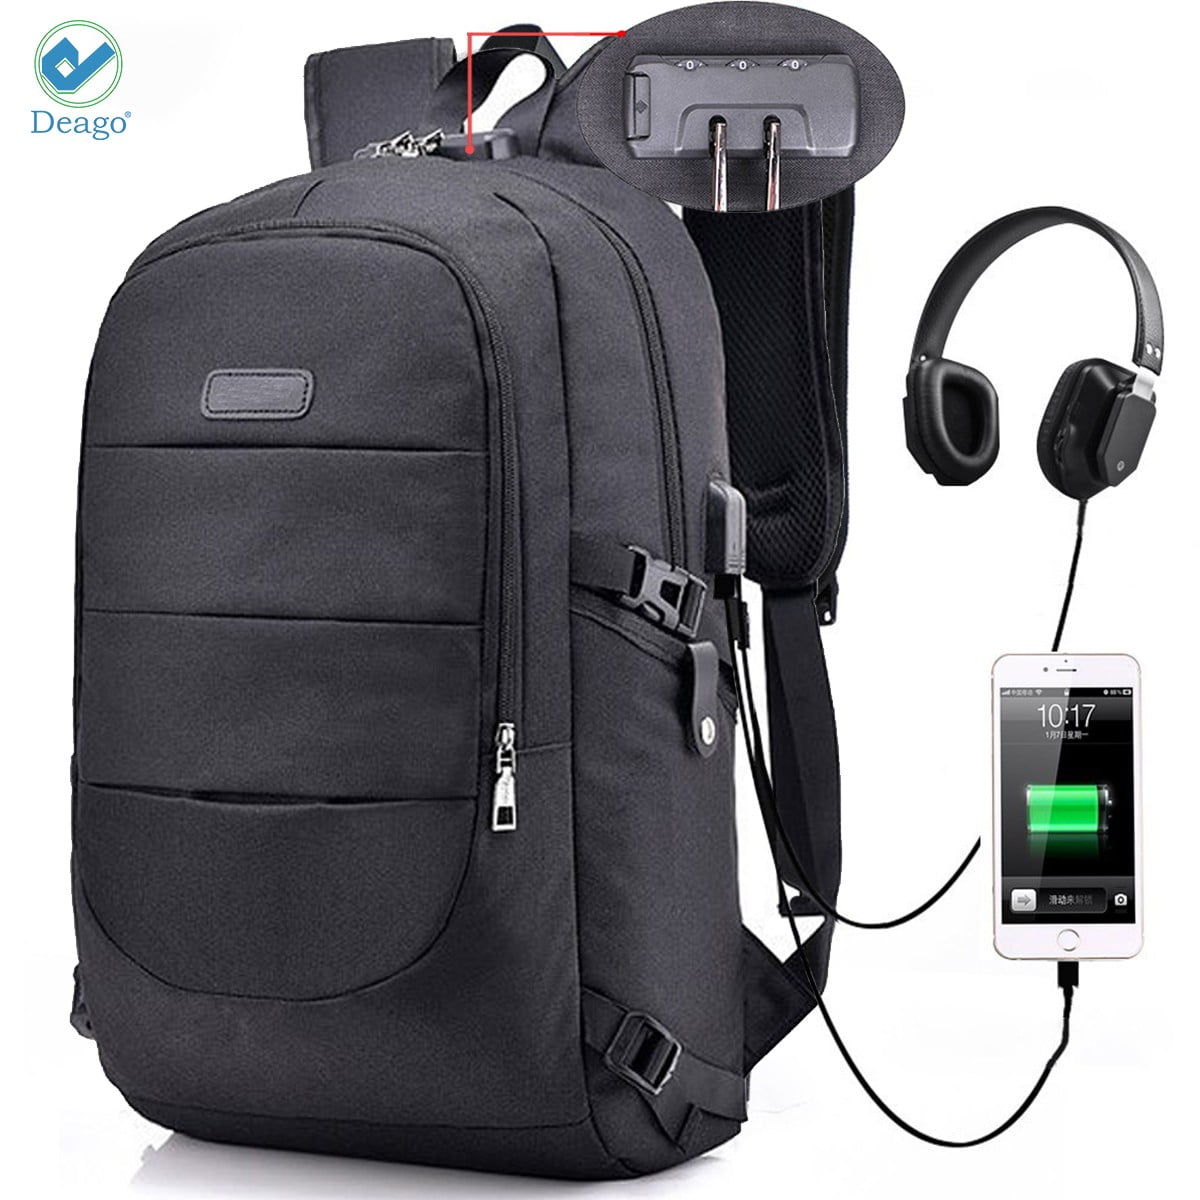 High Capacity Travel Laptop Water Resistant Anti-Theft Backpacks with USB Charging Port and Lock for Men Women College School Student Casual Hiking Halloween 